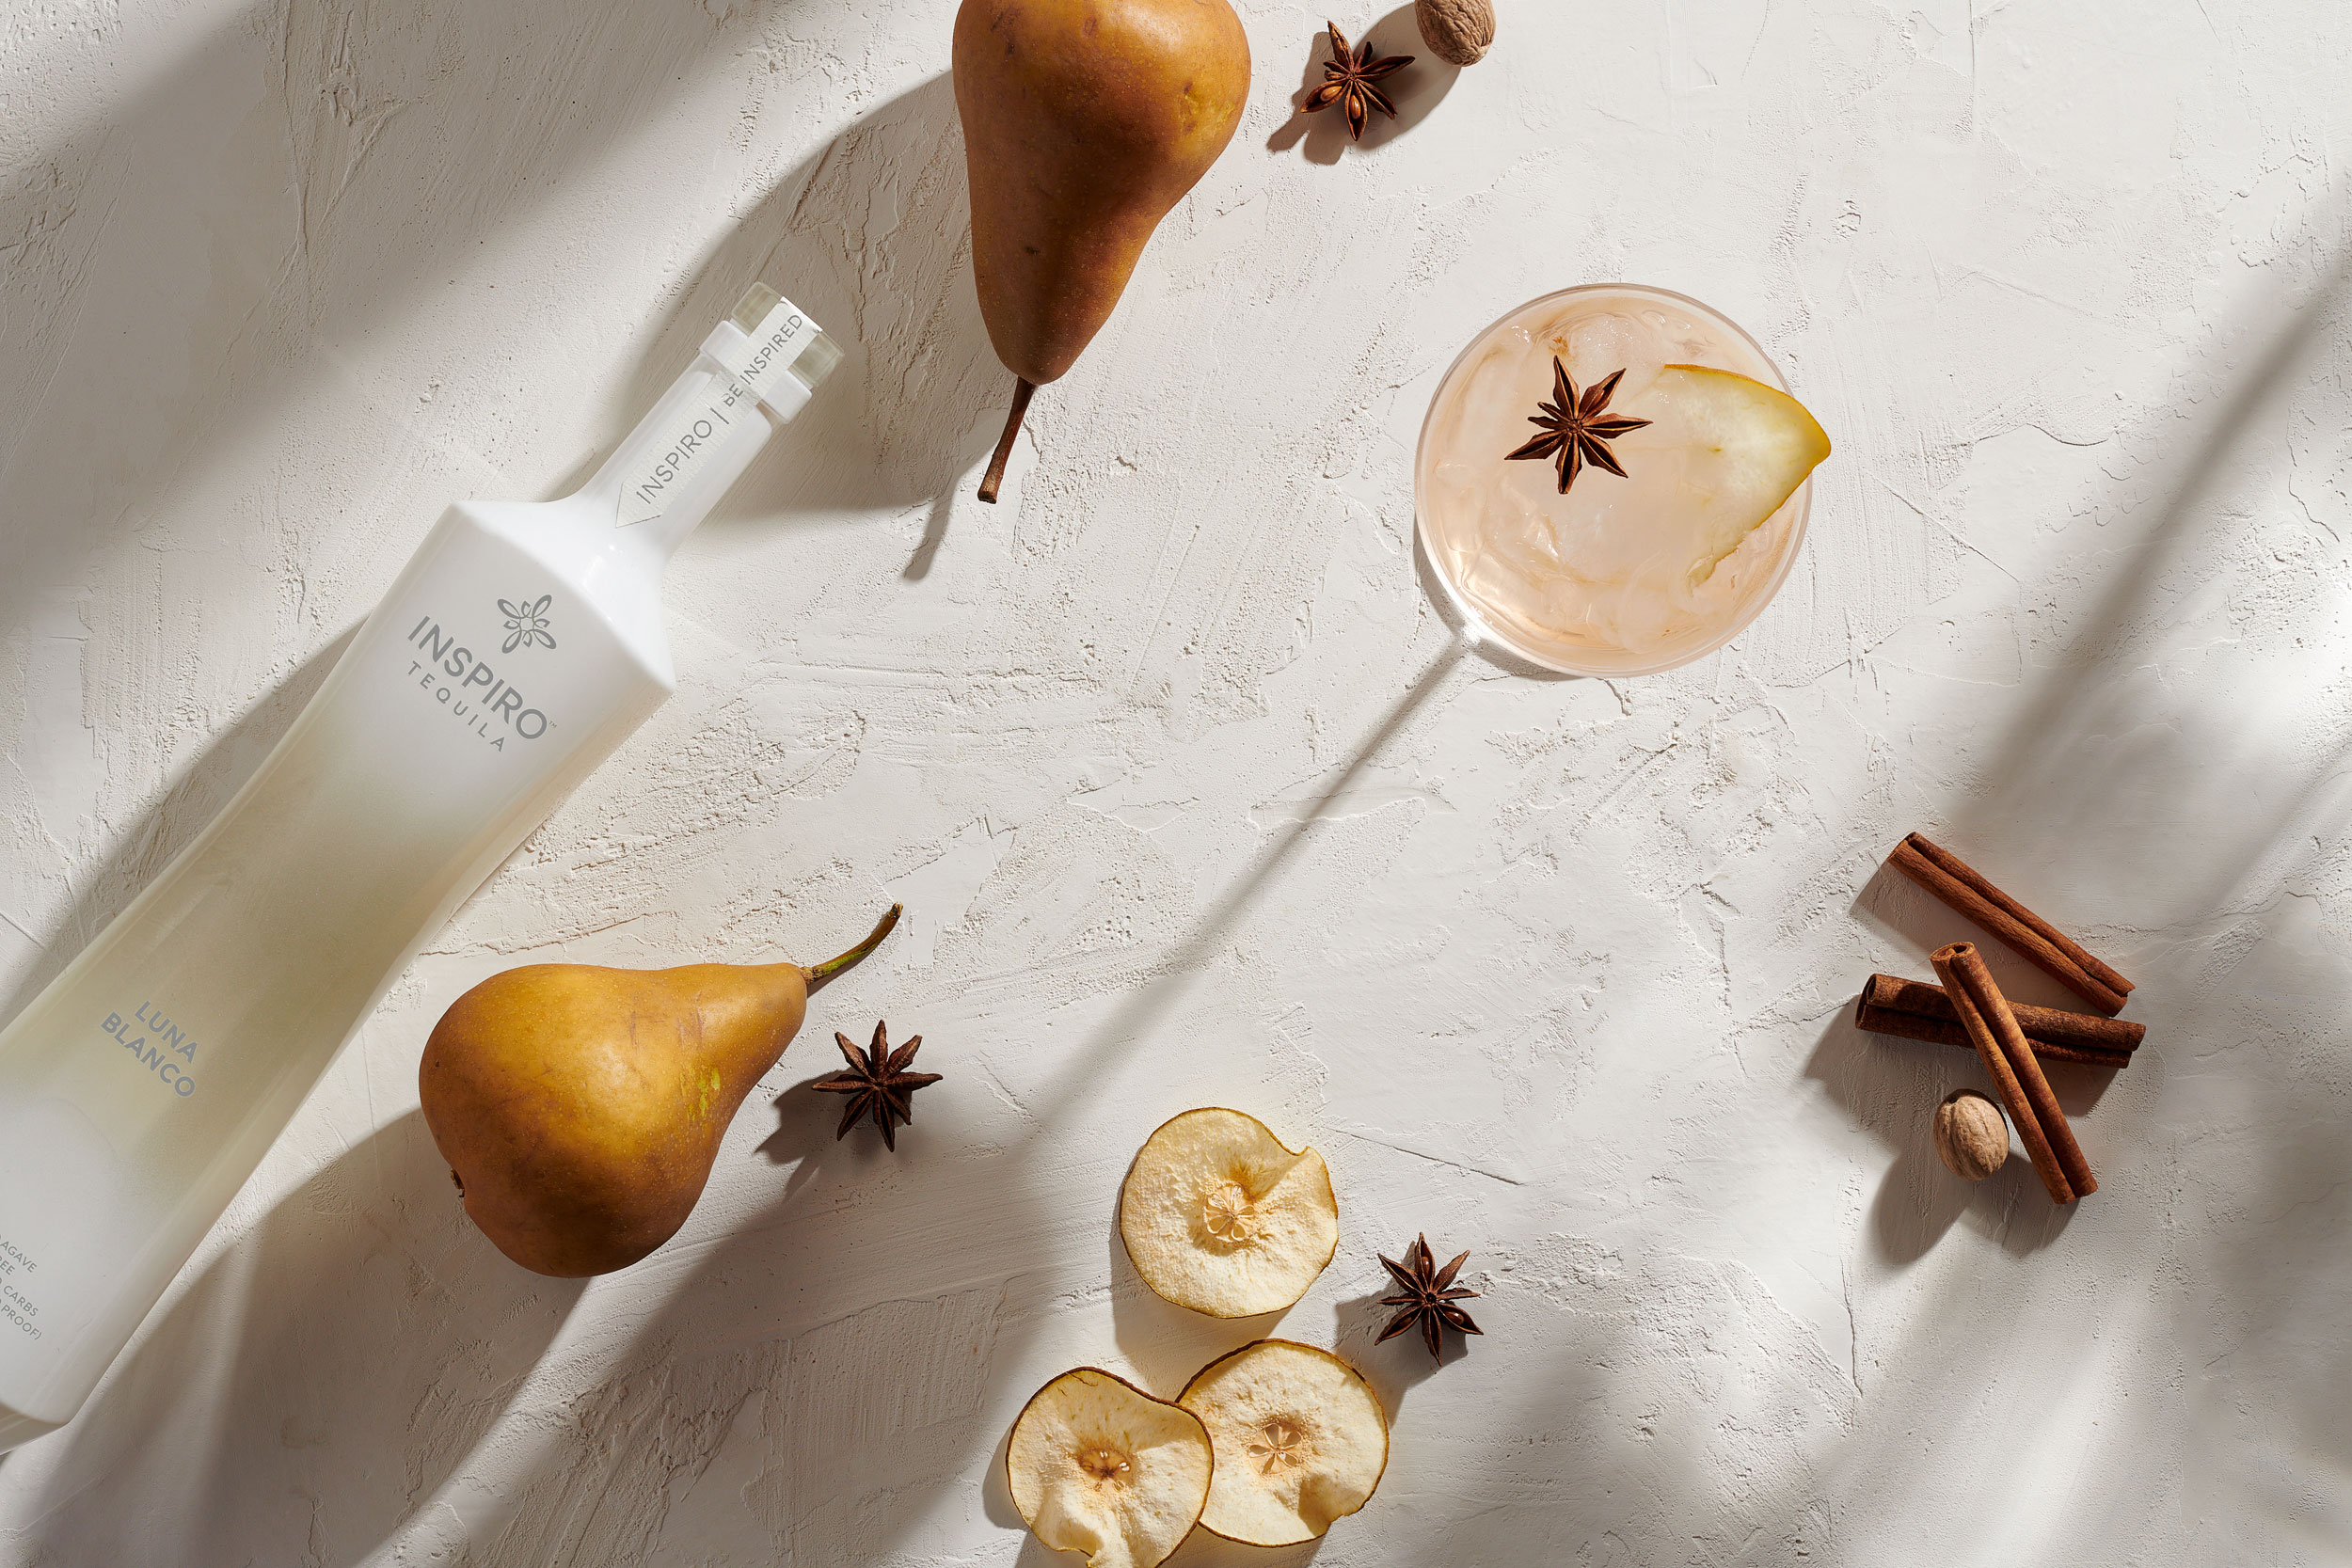 Overhead image of tequila cocktail, alcohol bottle, pears and spices